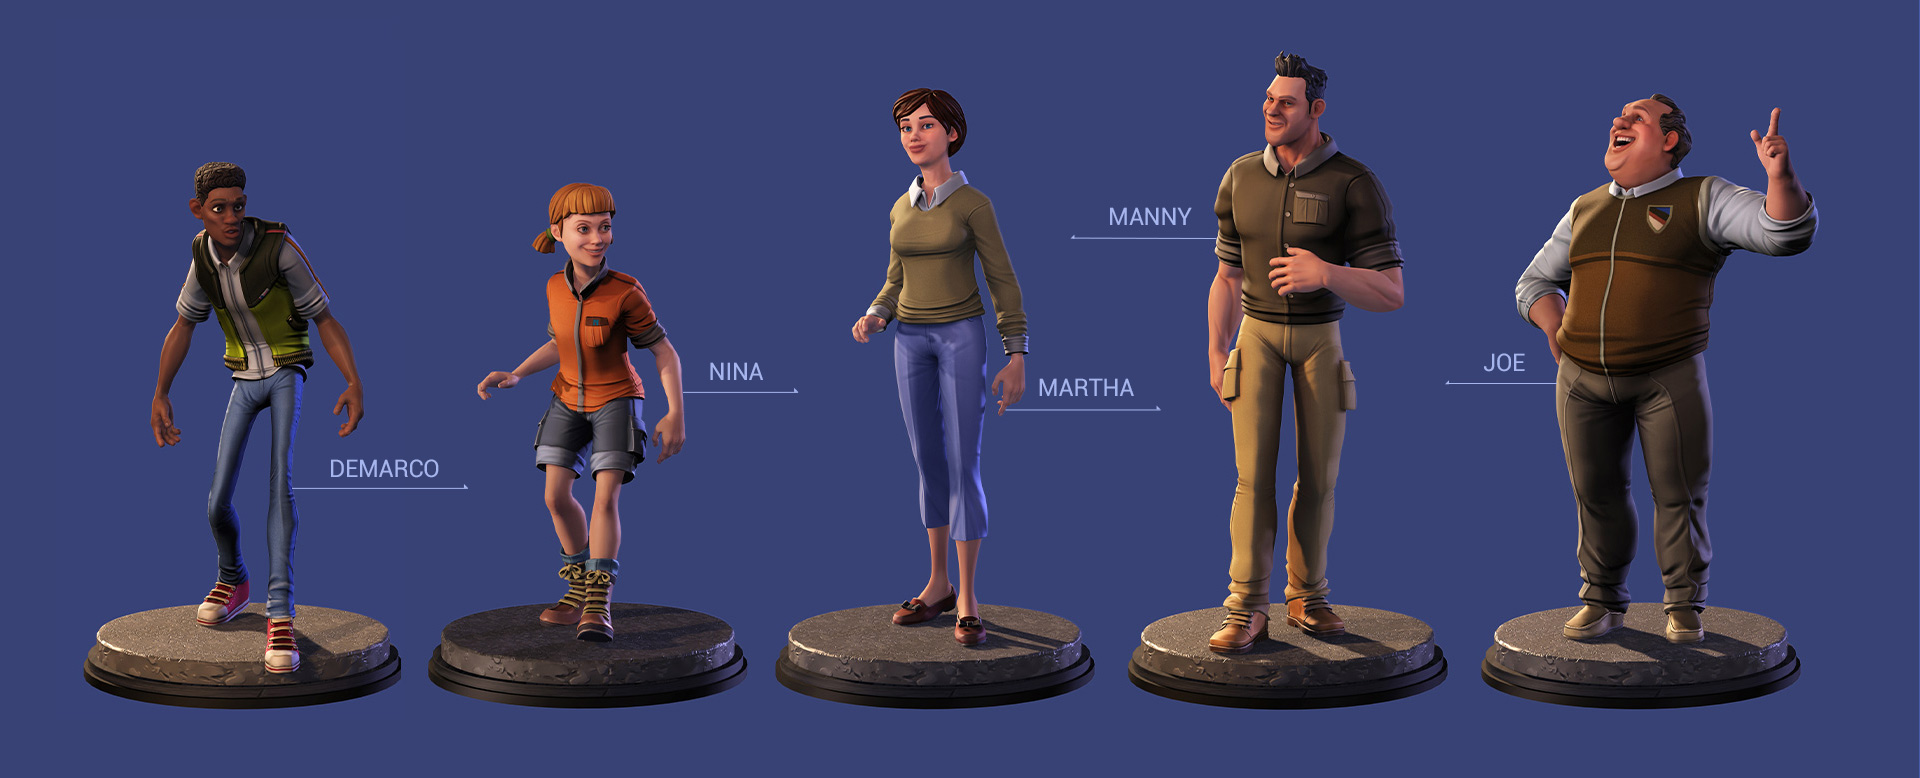 adventure figures set-body shapes in clothes